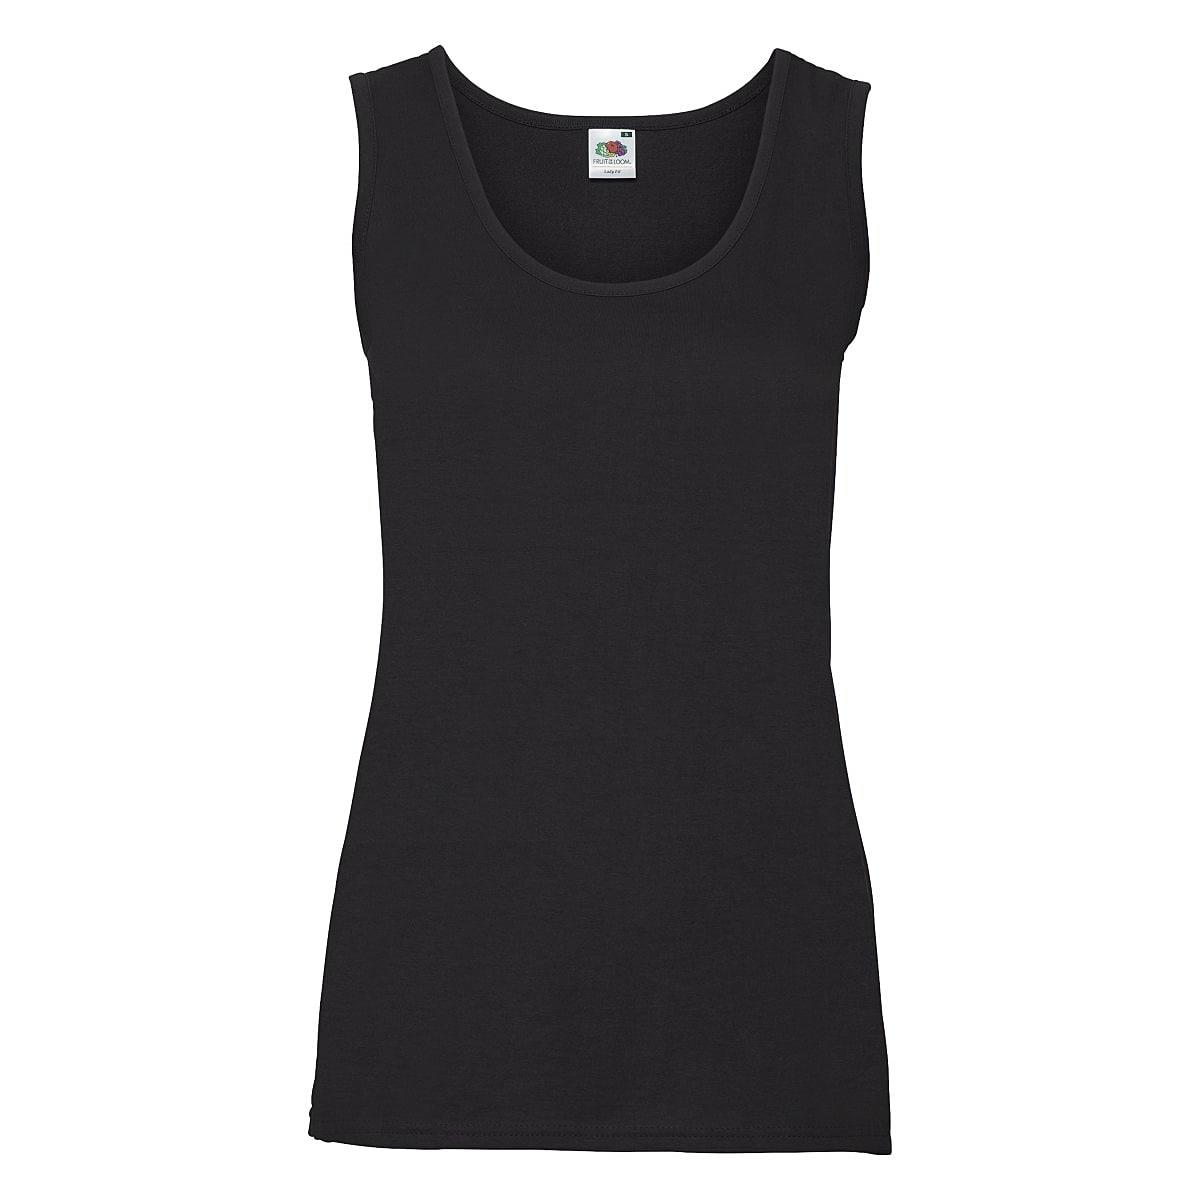 Fruit Of The Loom Lady-Fit Valueweight Vest in Black (Product Code: 61376)